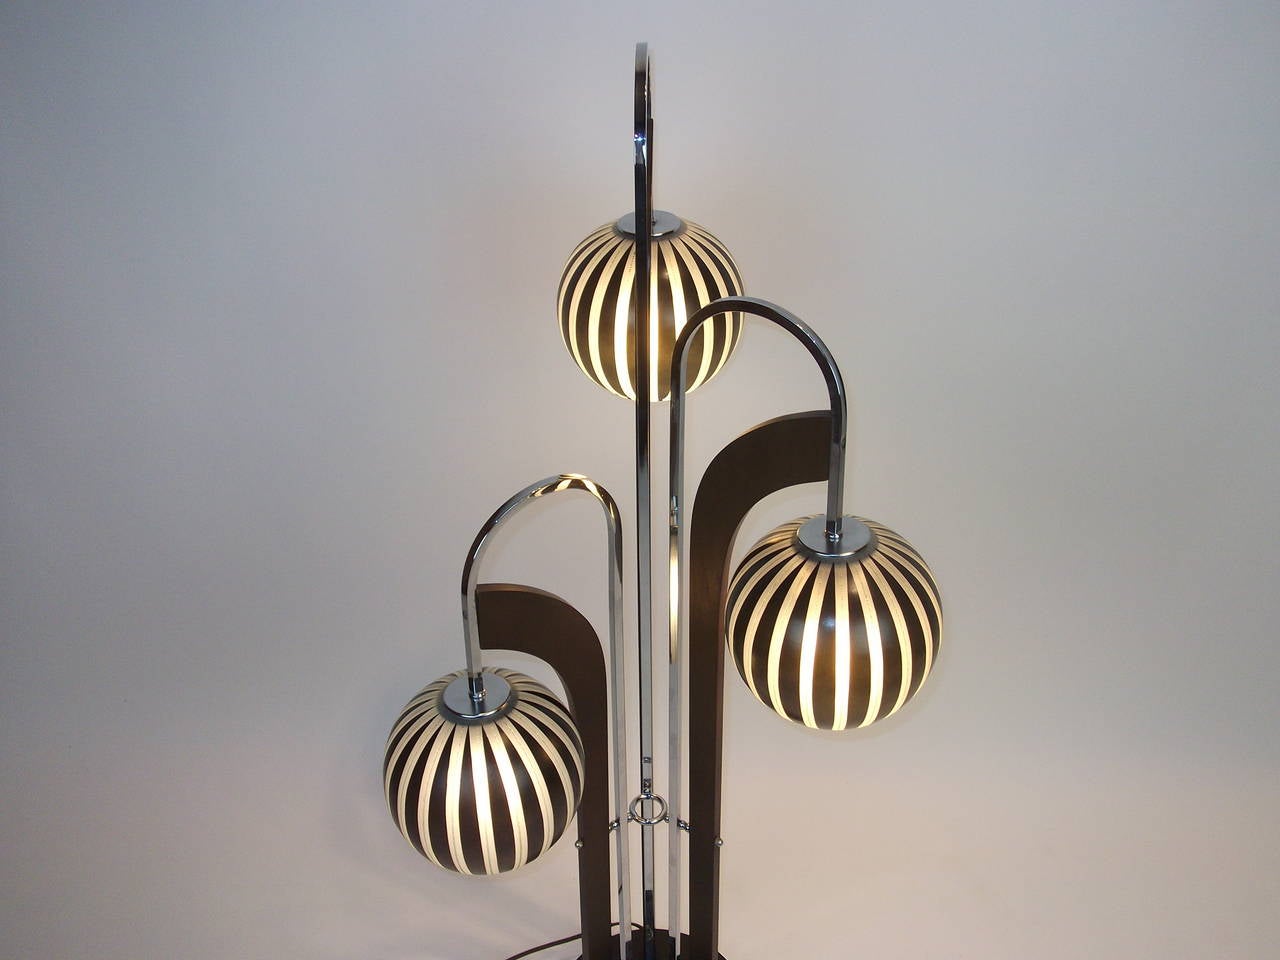 Outstanding Mid-century modern 3 headed lamp - 3 glass globes (black with white strips and a green stripe in the center of each white area - incredibly beautiful. chrome arms and wood accents.  This is a tri-light, you can have one, two or three of